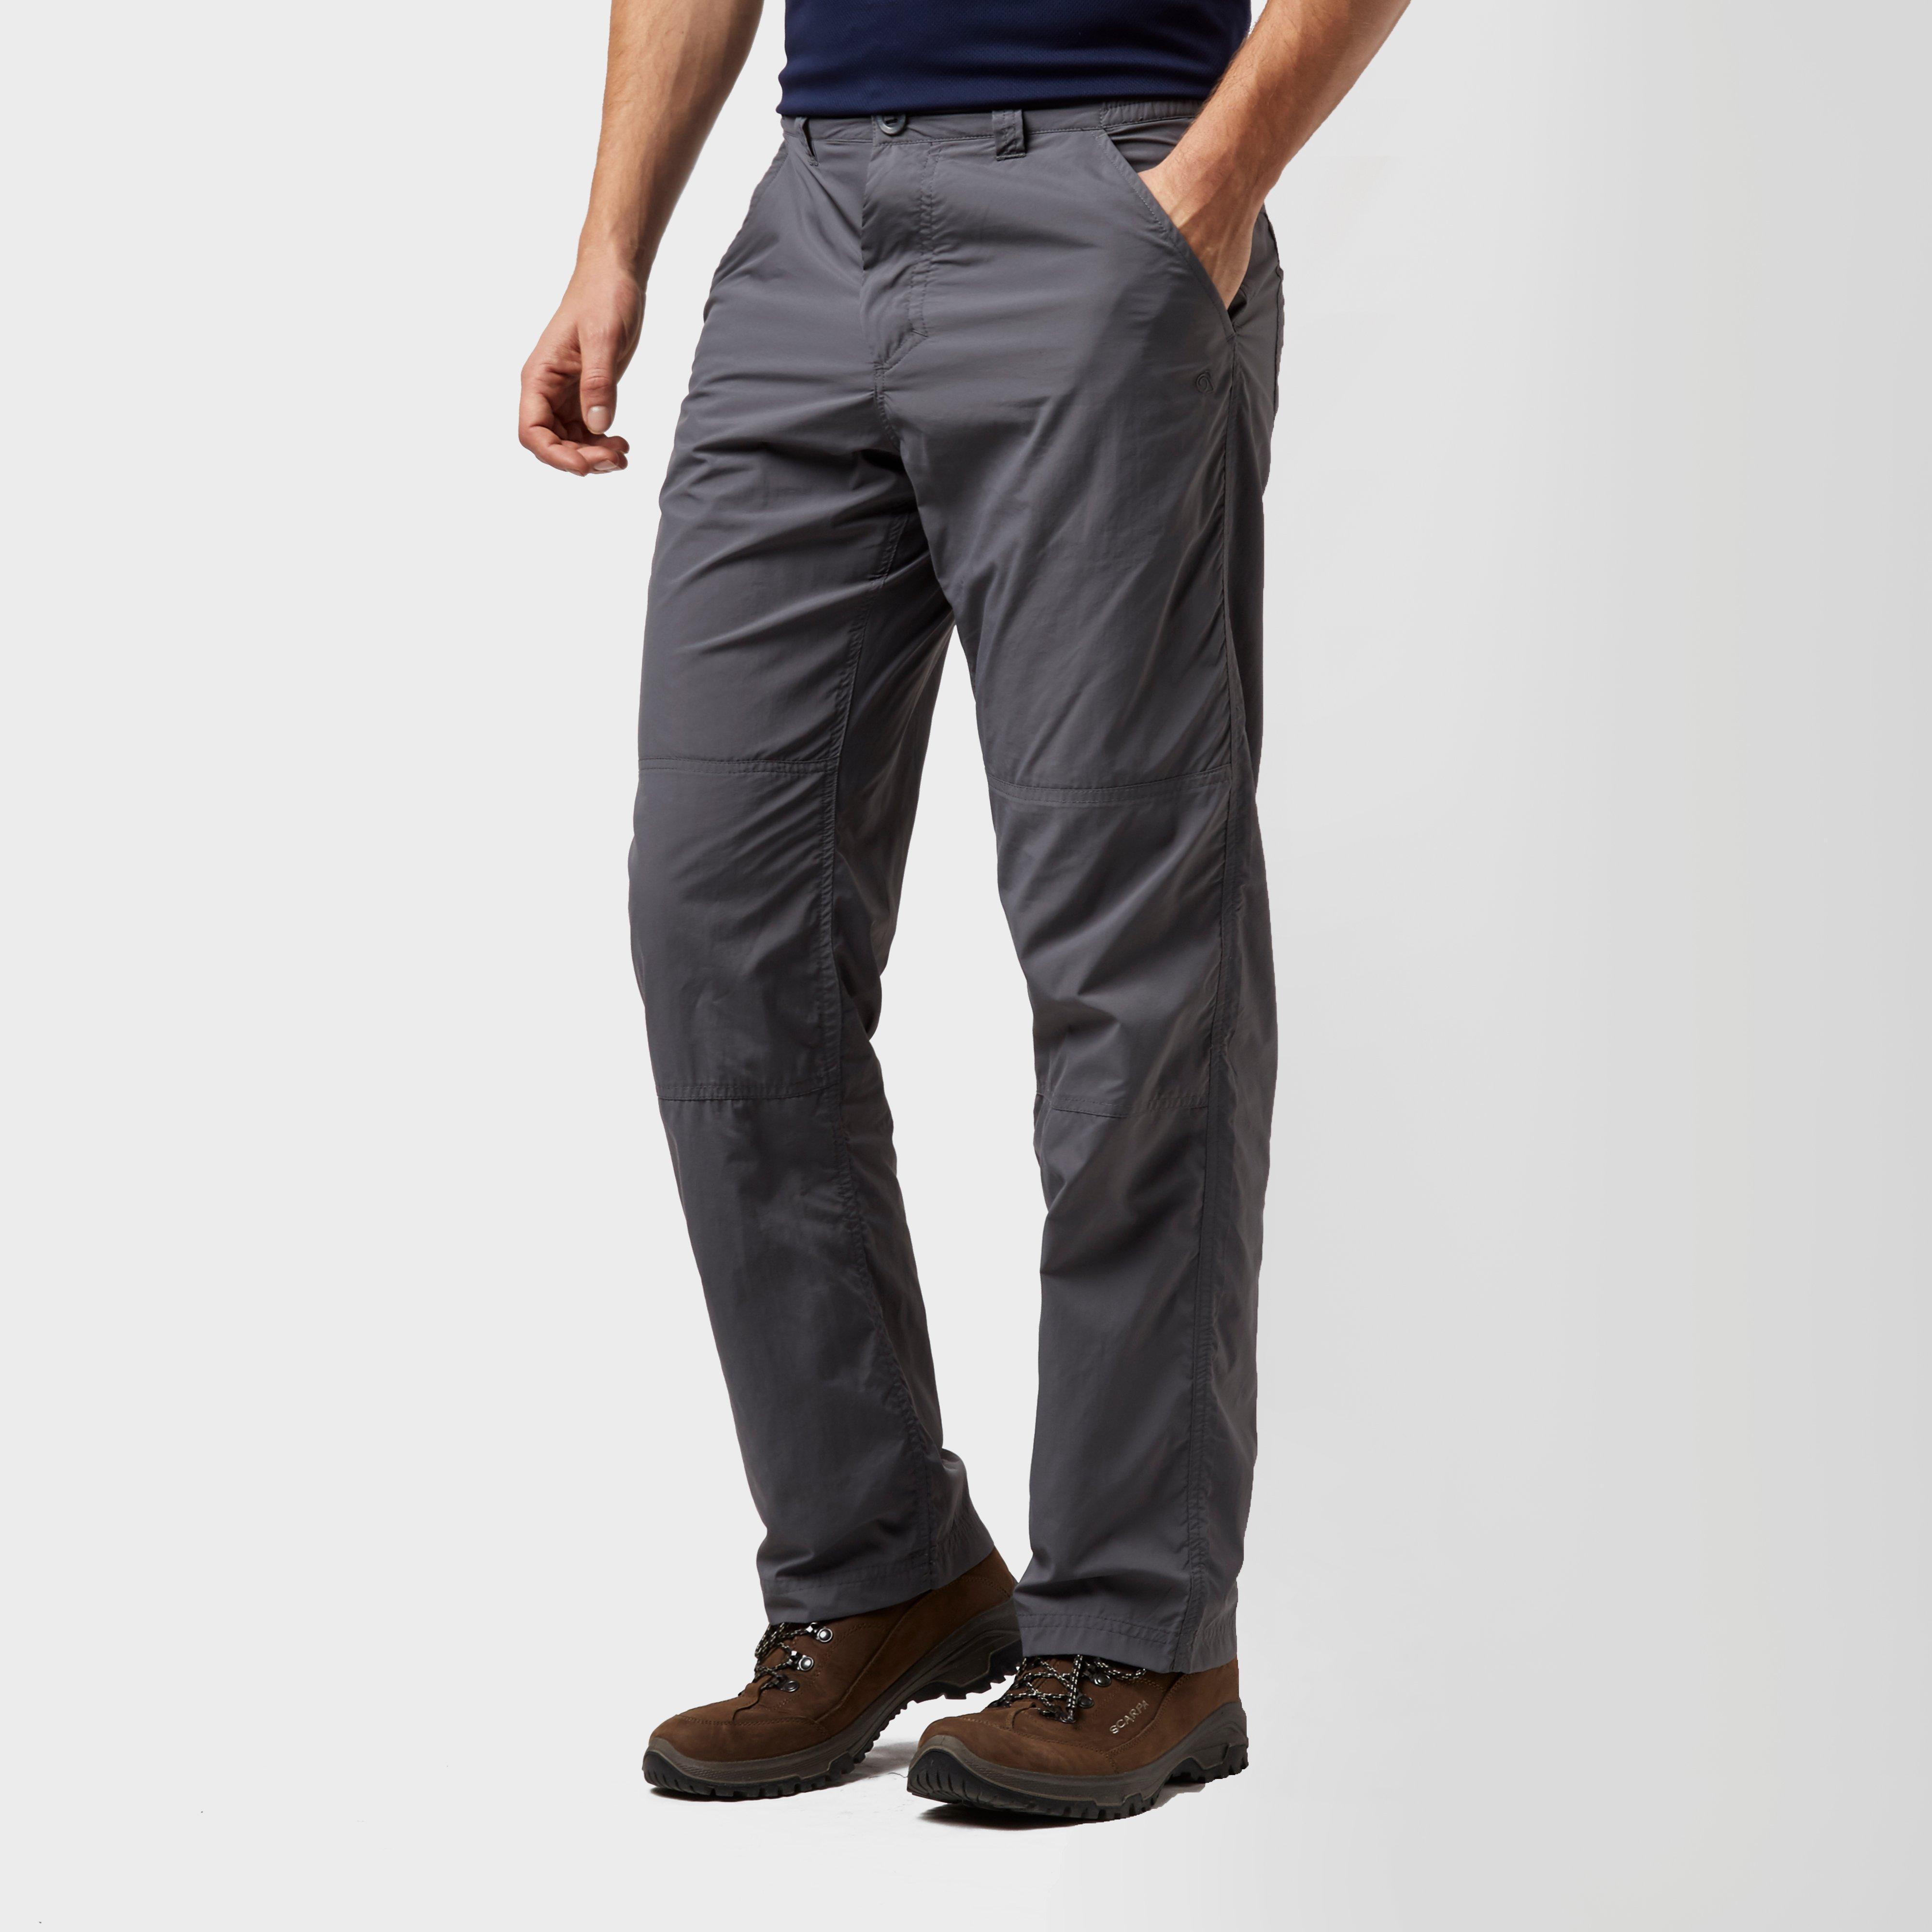 Craghoppers Men’s NosiLife Trousers